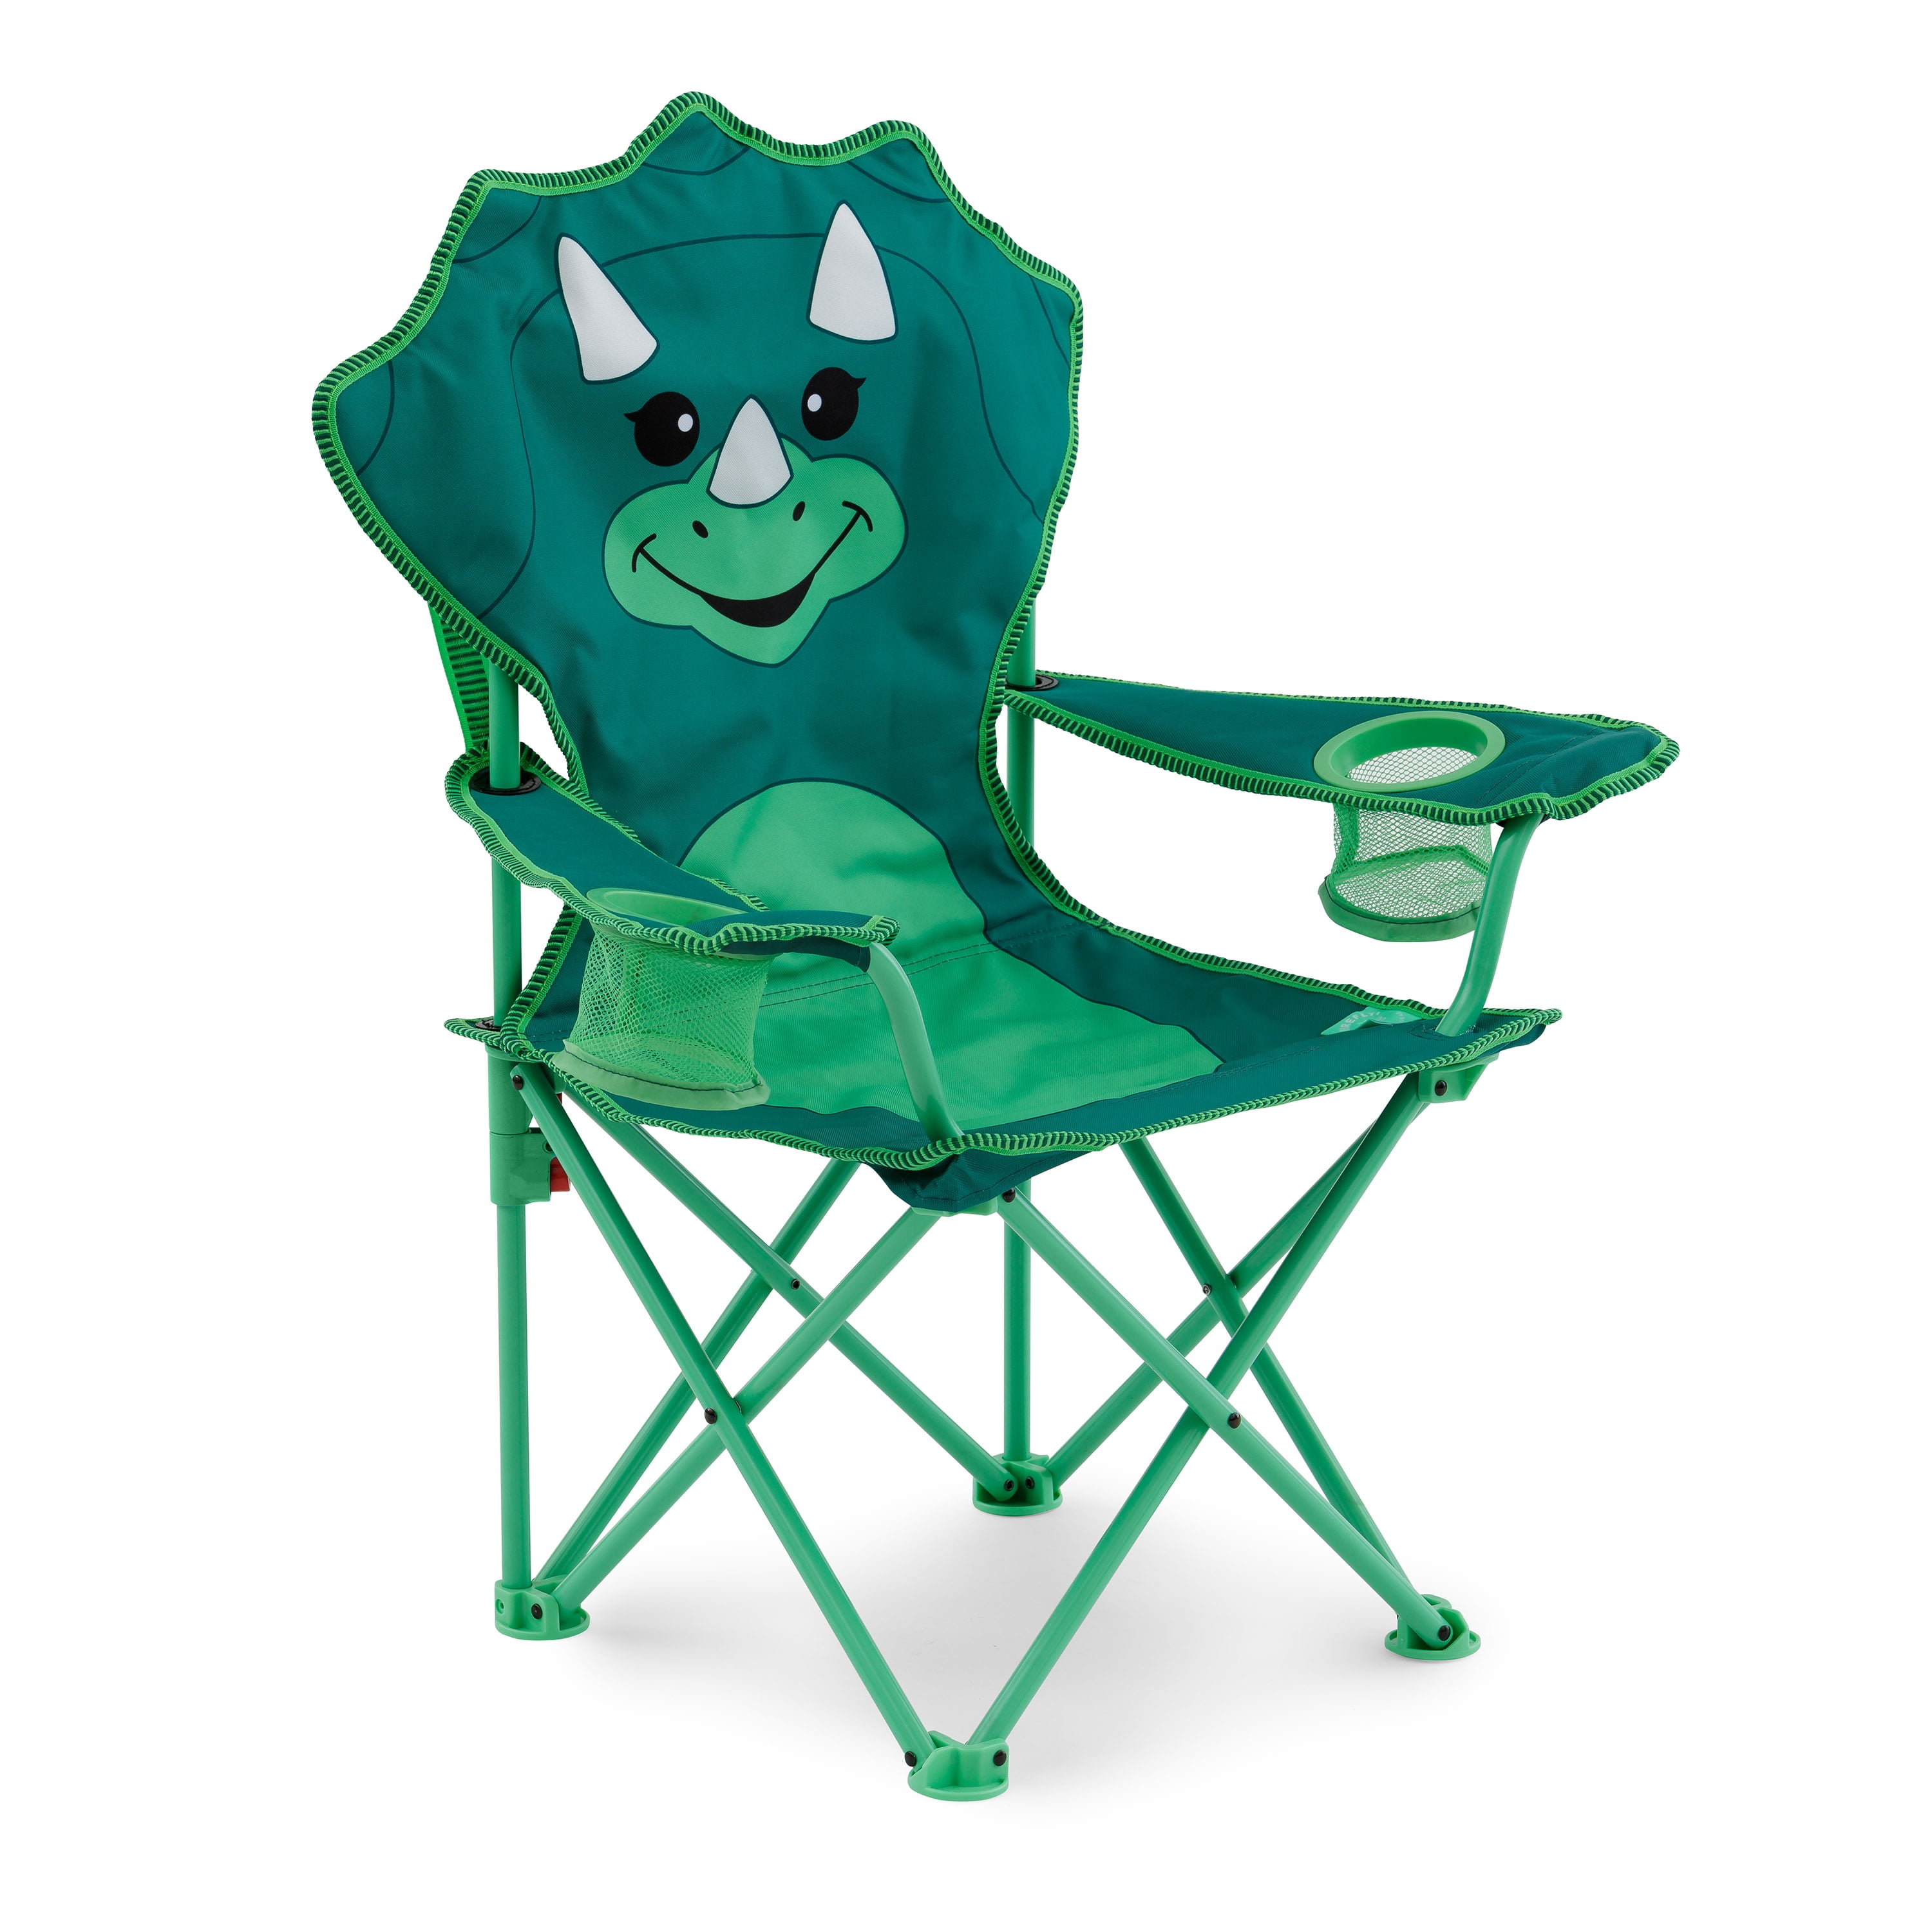 Firefly! Outdoor Gear Chip the Dinosaur Kid's Camping Chair (Green) $18  + Free S&H w/ Walmart+ or $35+